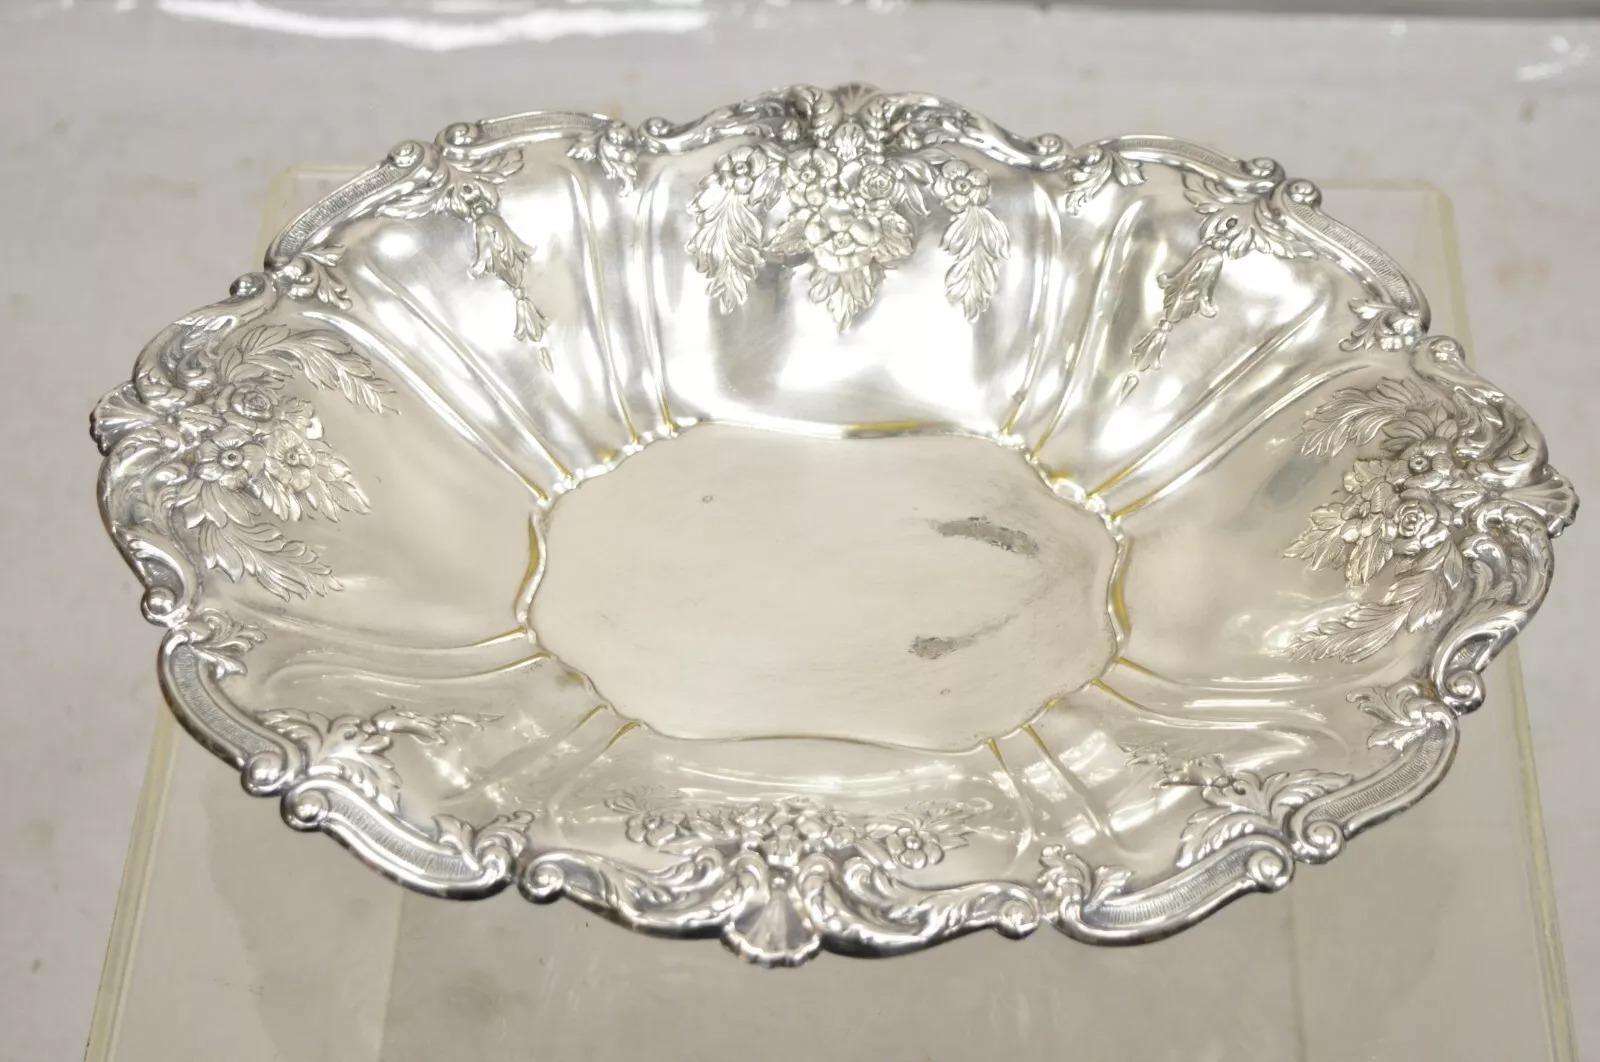 Vintage English Victorian Flower Rose Repousse Silver Plated Footed Oval Dish. Circa Early to Mid 20th Century. Measurements:  4